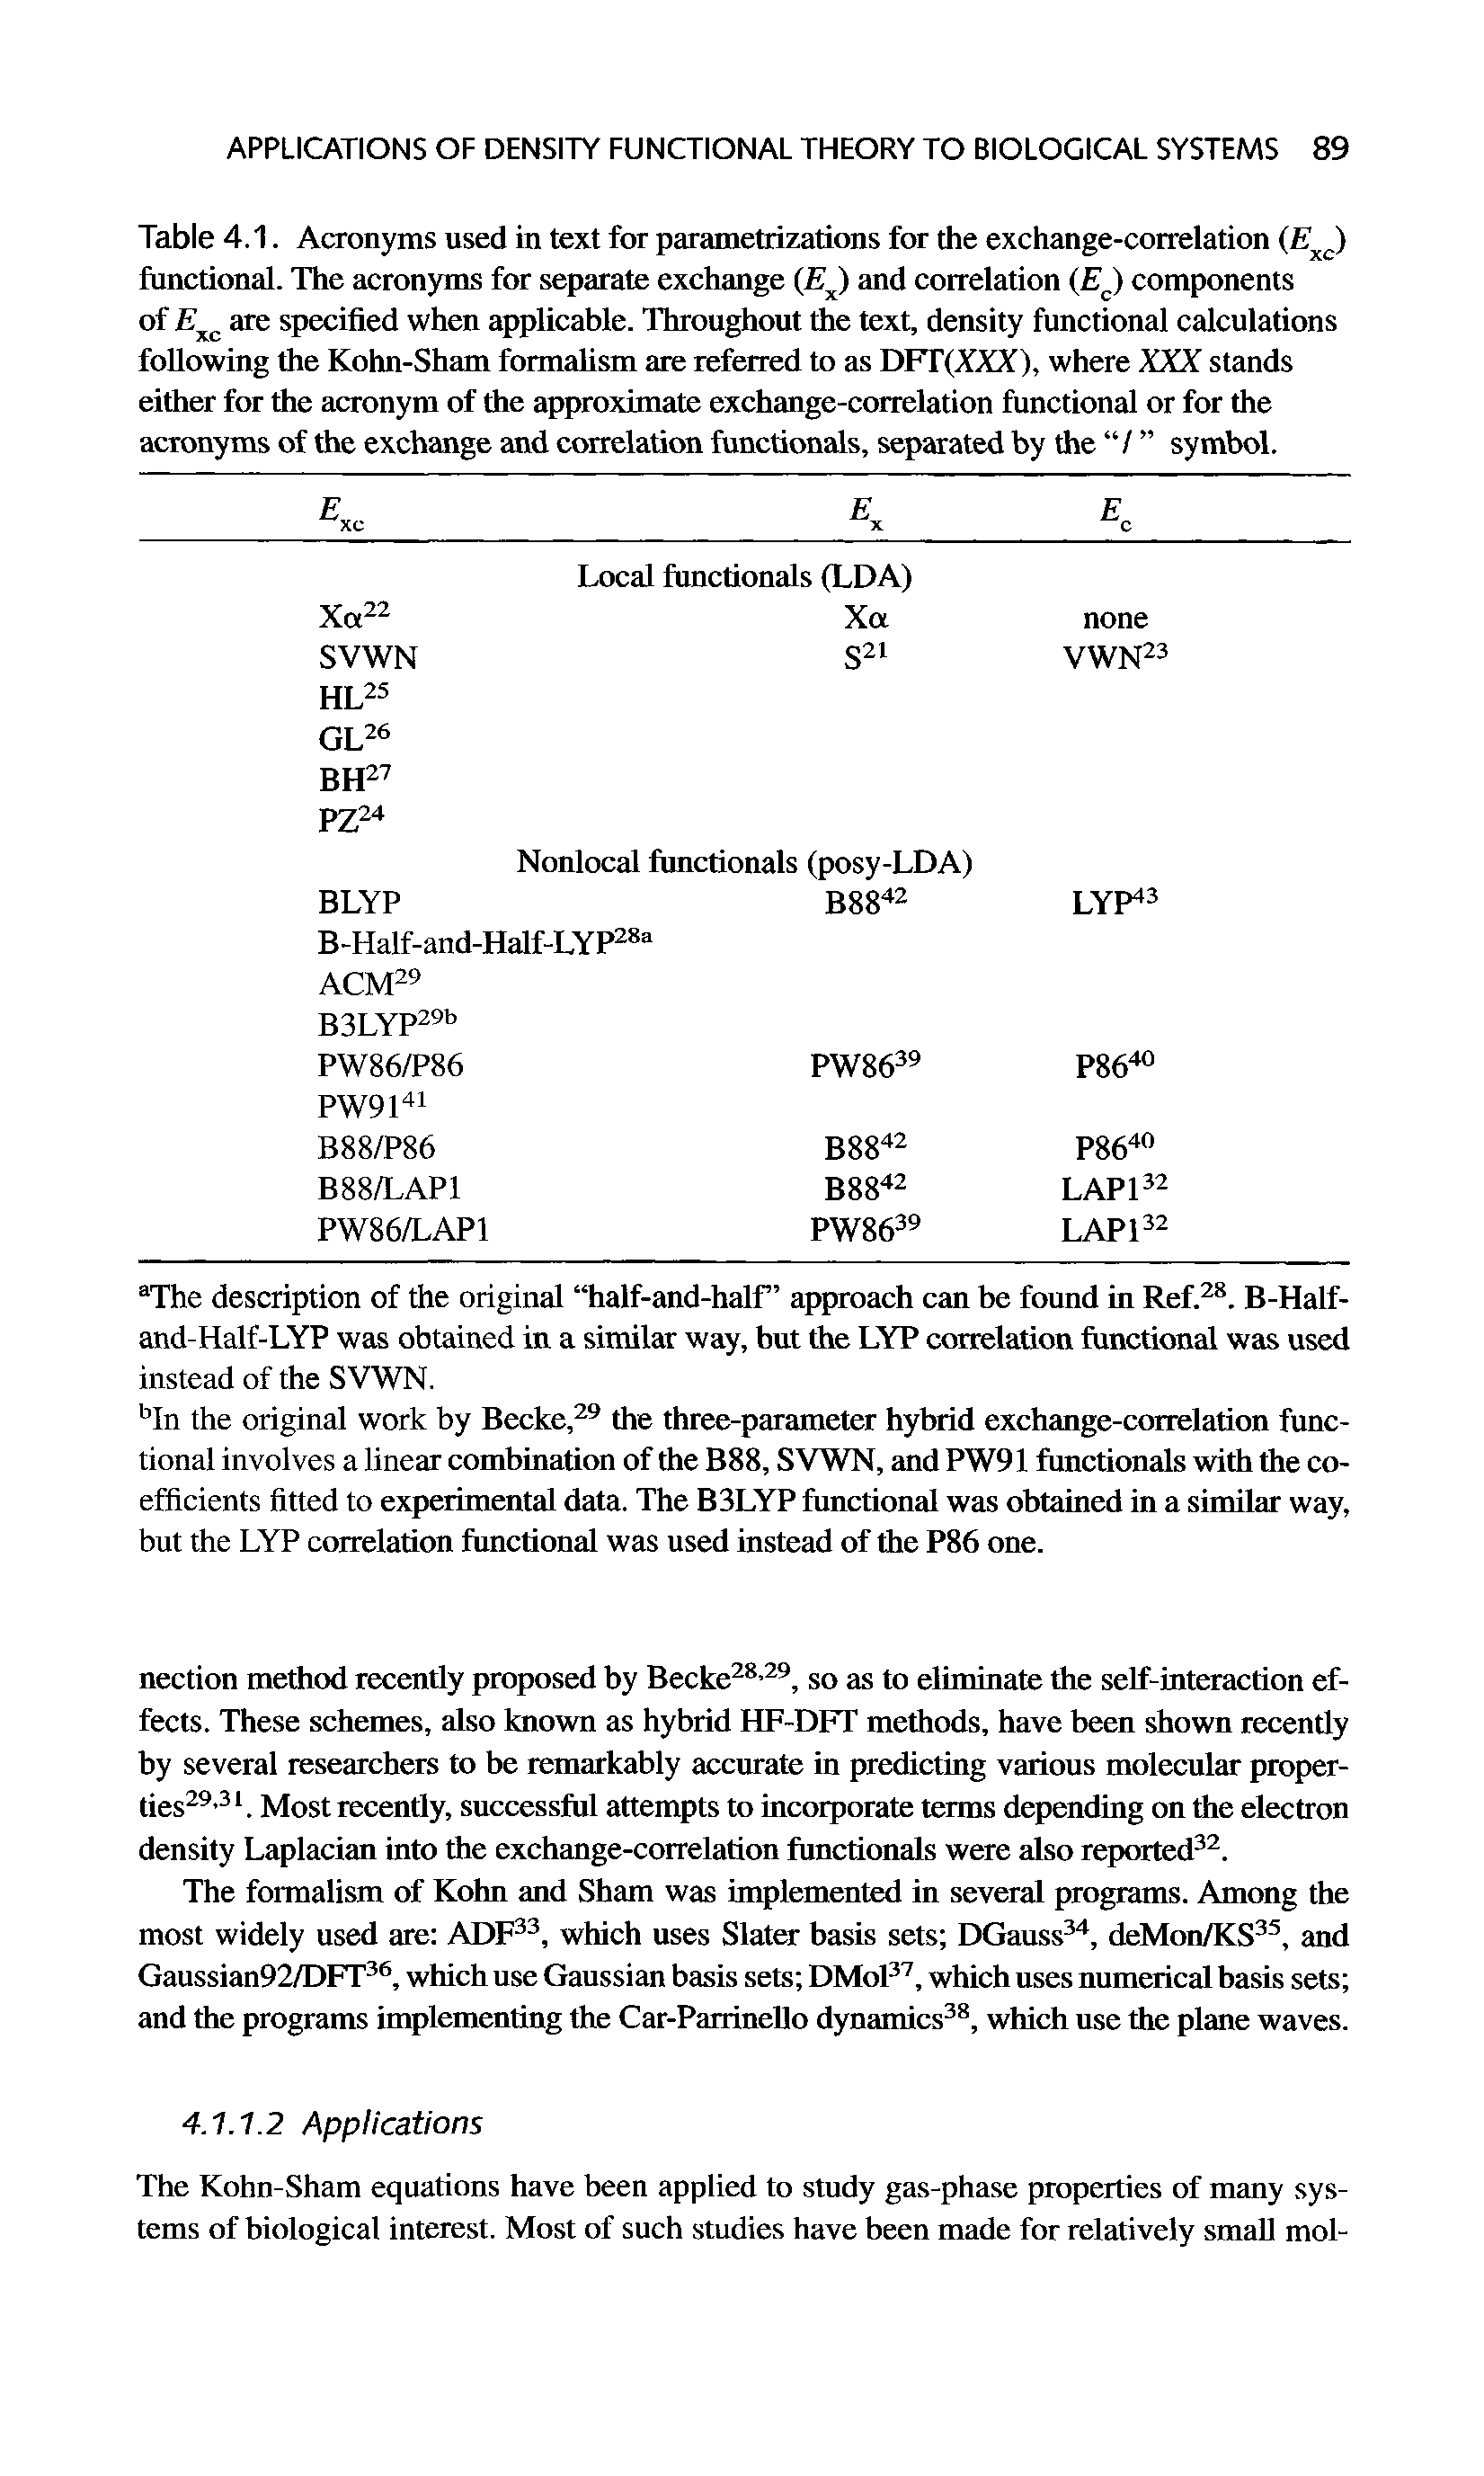 Table 4.1. Acronyms used in text for parametrizations for the exchange-correlation (Exc) functional. The acronyms for separate exchange (Ej and correlation (E ) components of A xc are specified when applicable. Throughout the text, density functional calculations following the Kohn-Sham formalism are referred to as DFT(XXX), where XXX stands either for the acronym of the approximate exchange-correlation functional or for the acronyms of the exchange and correlation functionals, separated by the / symbol.